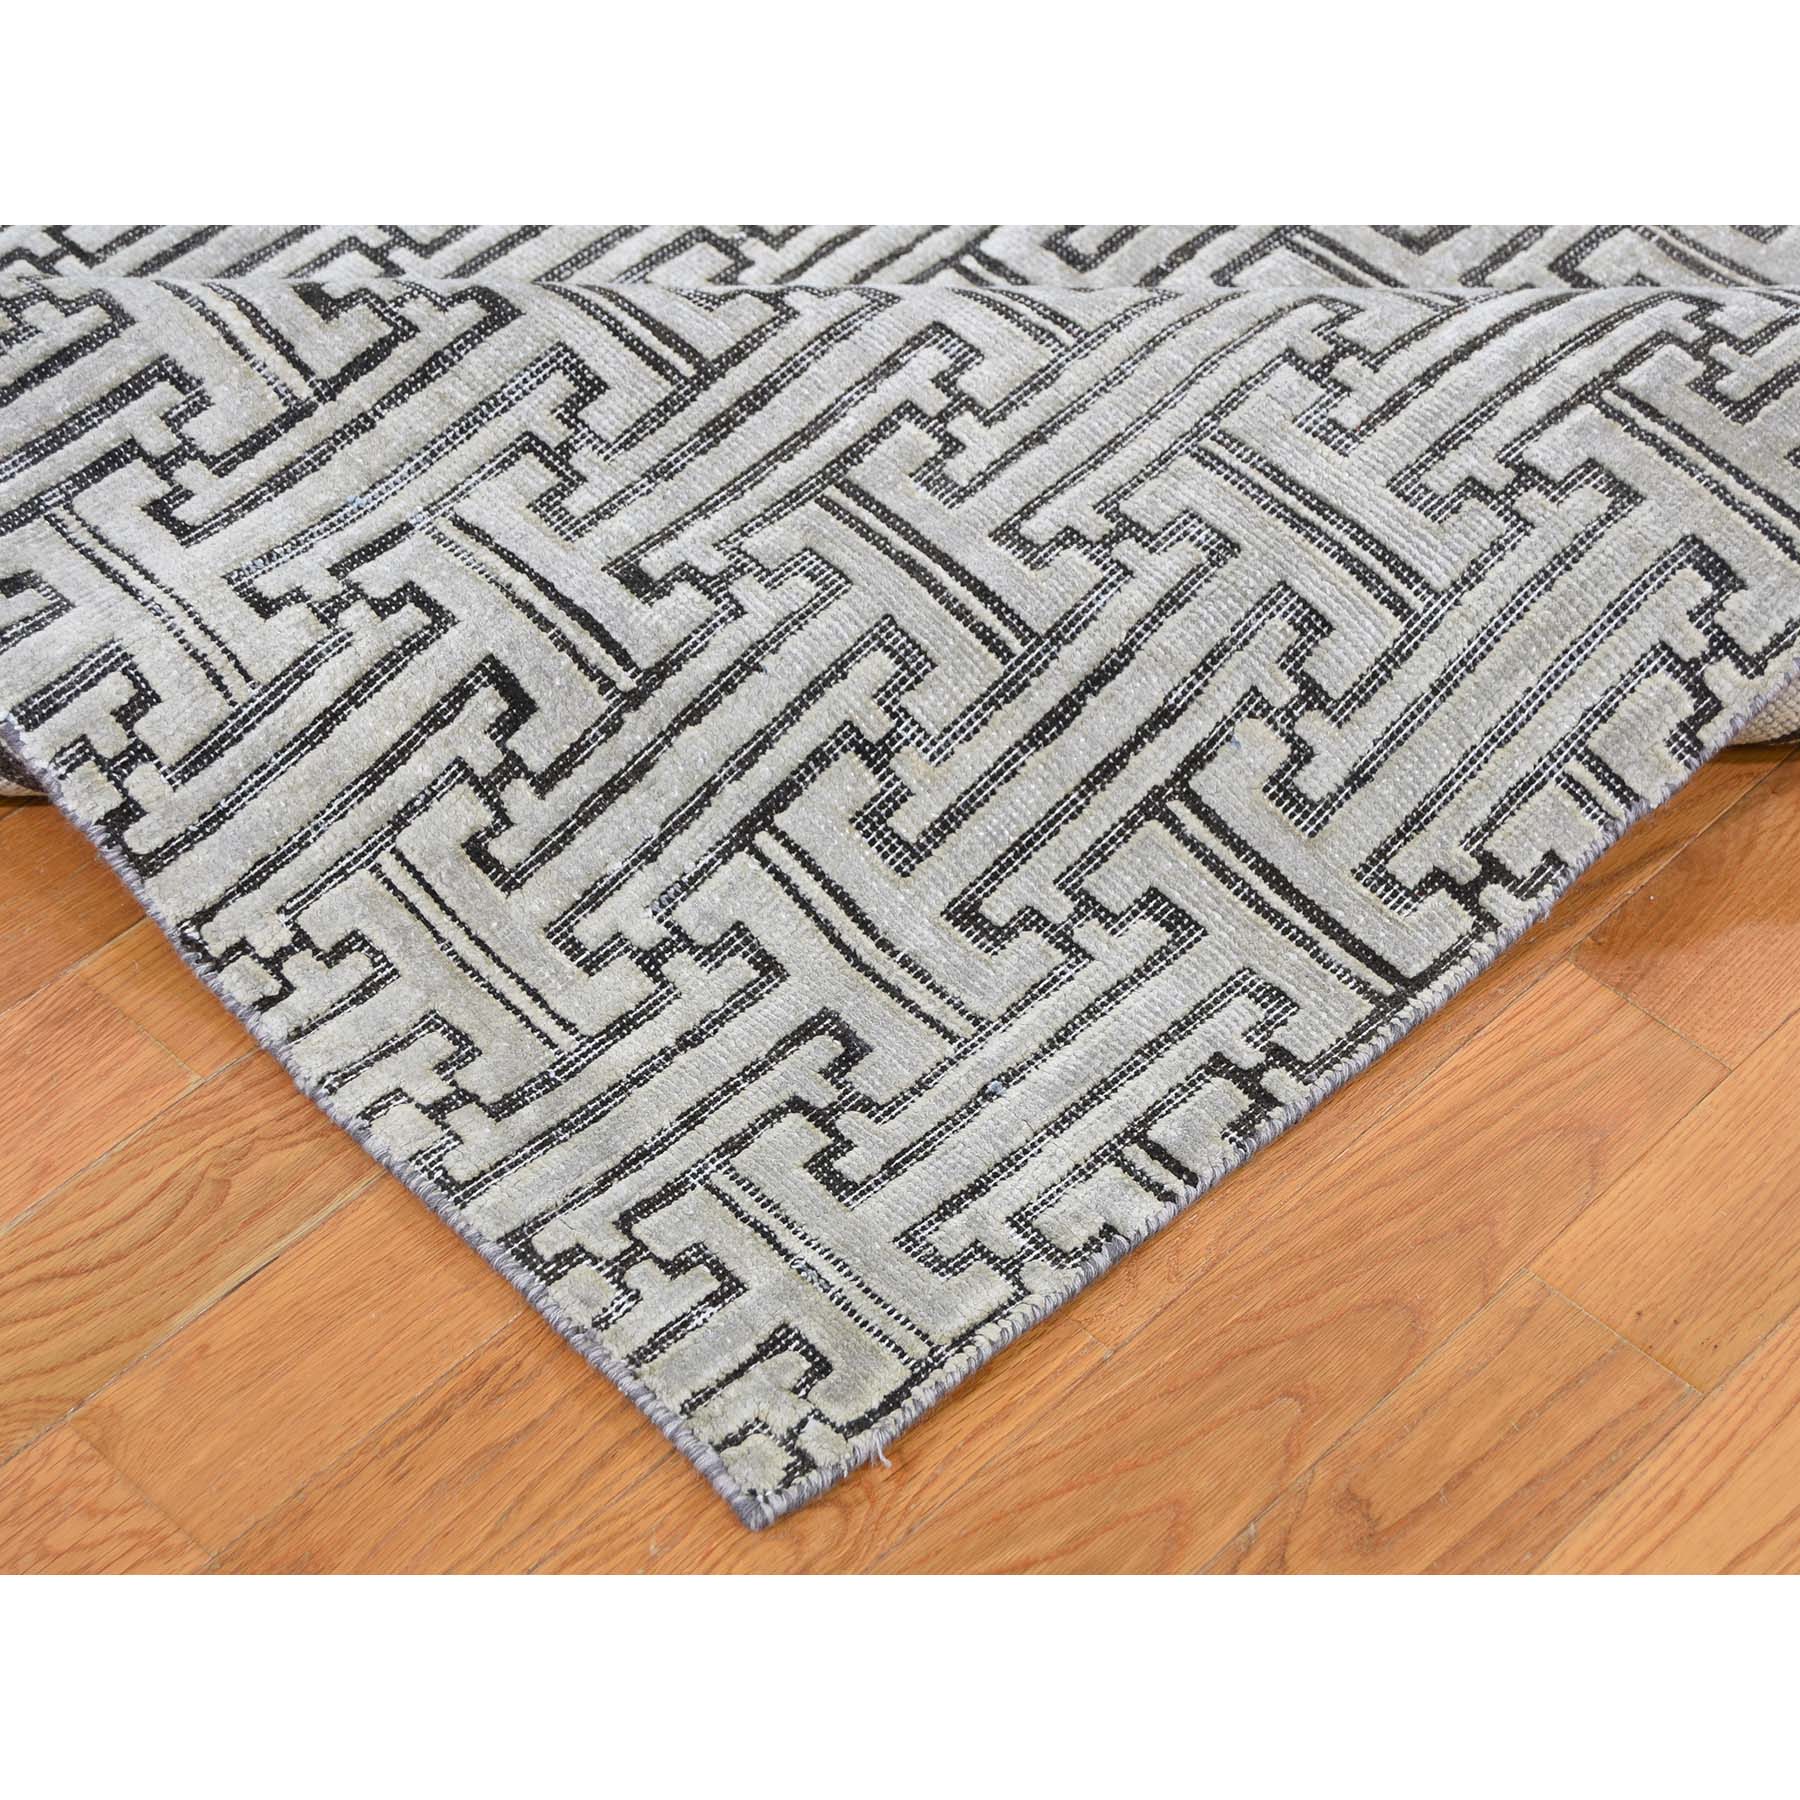 7-10 x10-3  Silk With Textured Wool Geometric Design Hand-Knotted Oriental Rug 